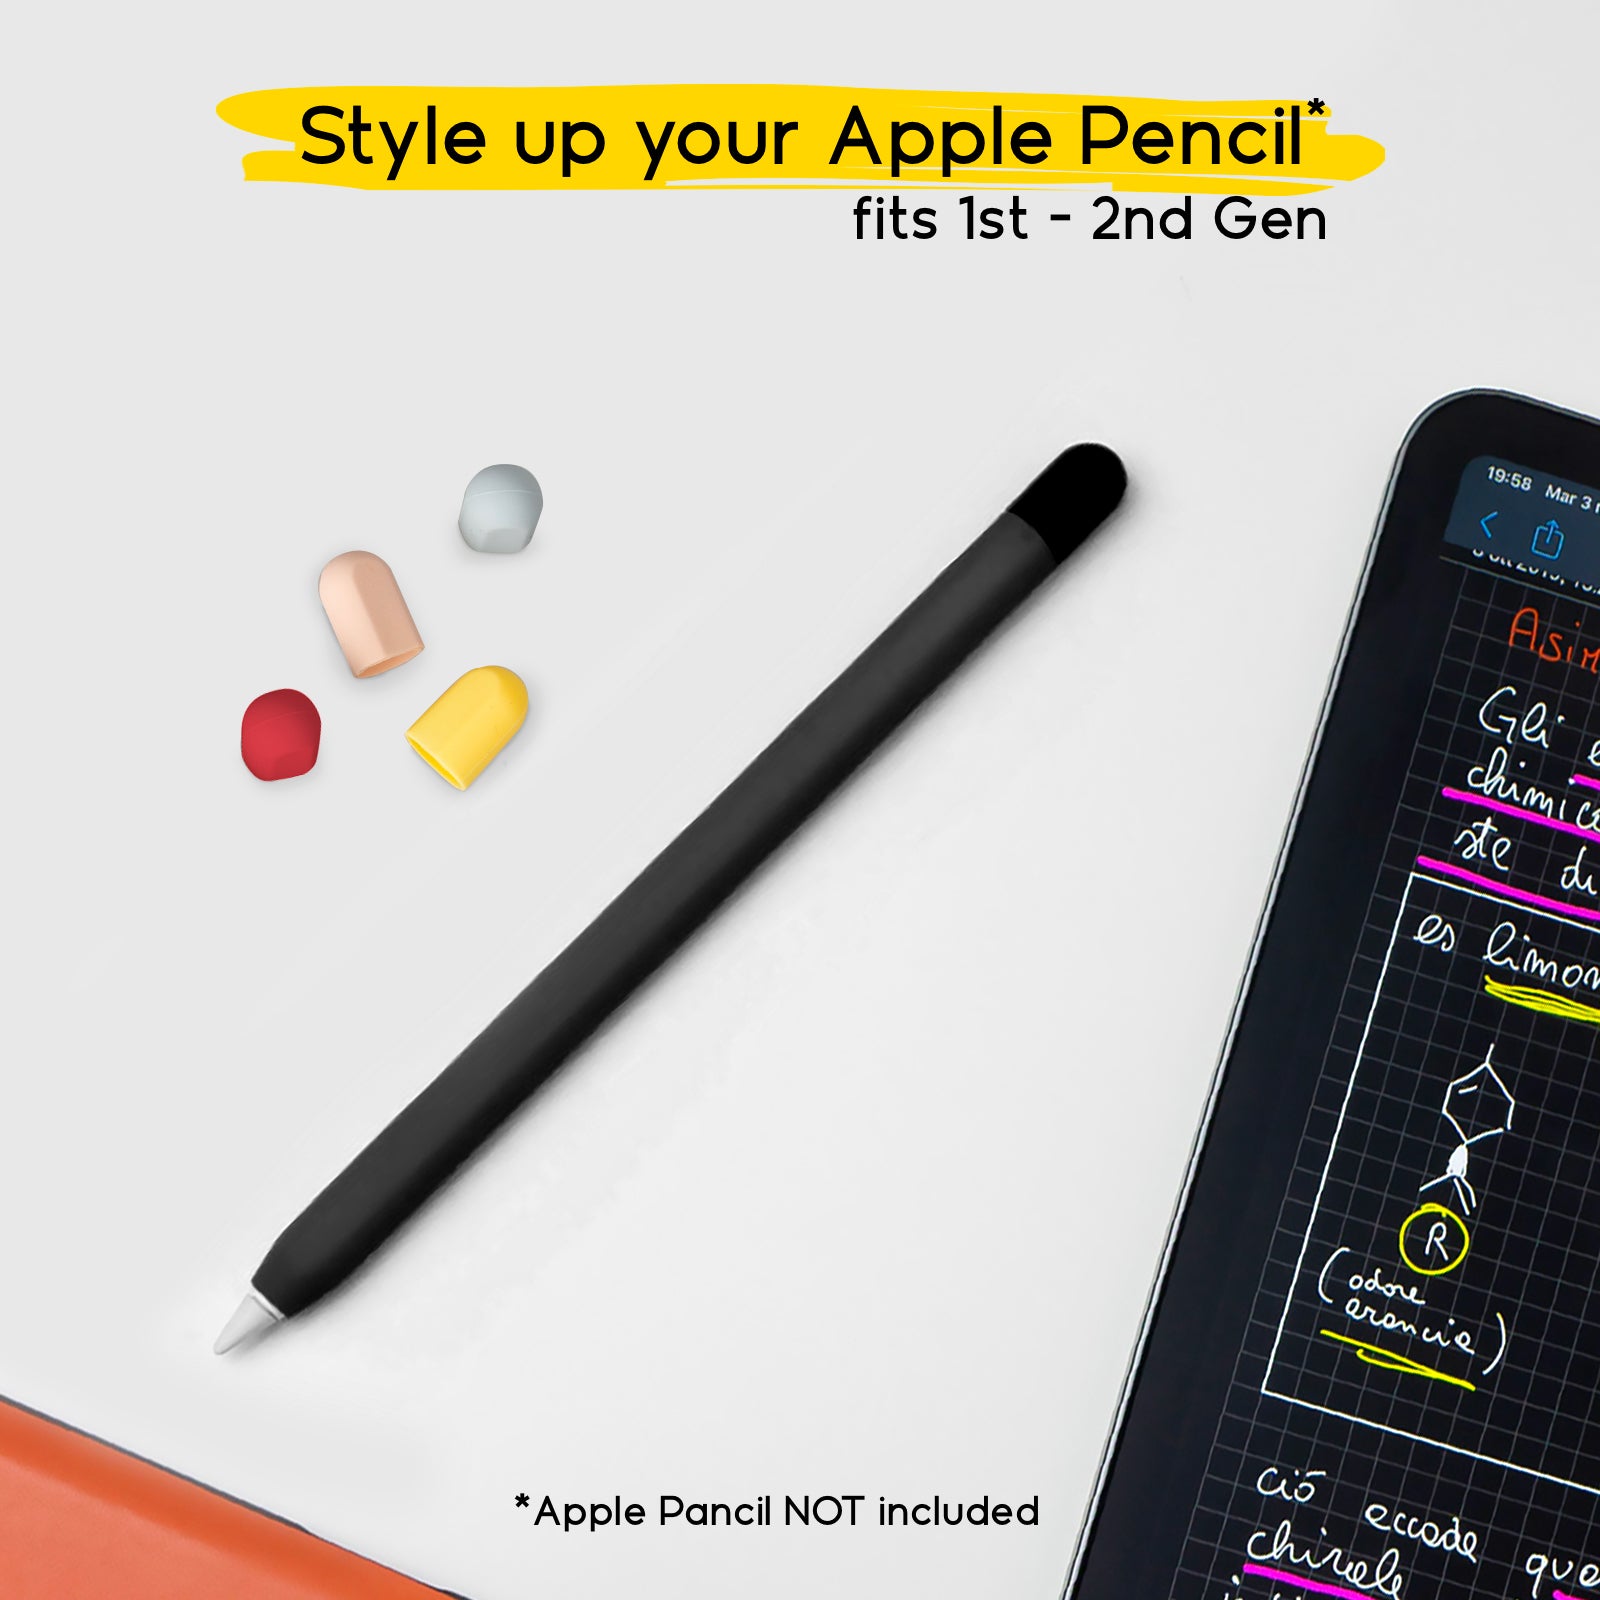 Black skin case for 1st and 2nd generation Apple Pencils with 5 colourful caps